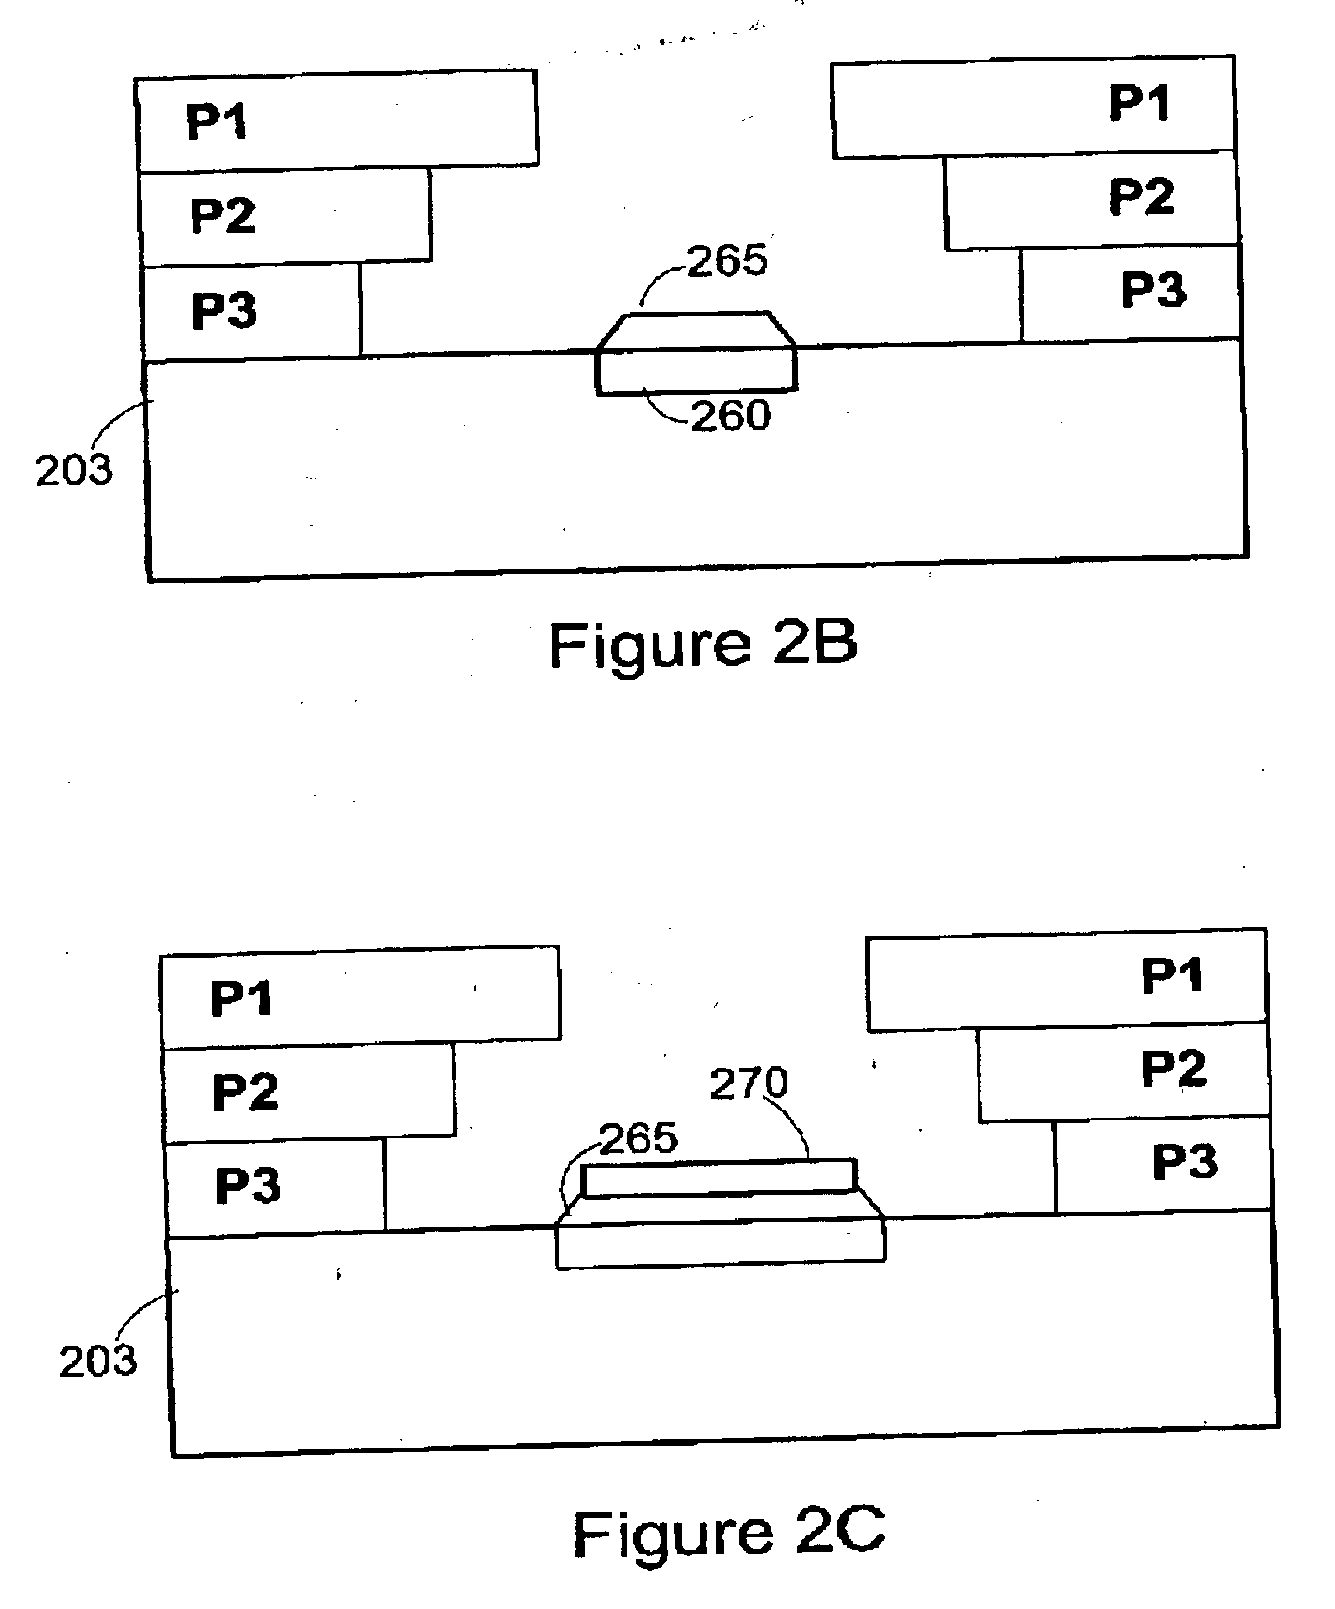 Forming a contact in a thin-film device